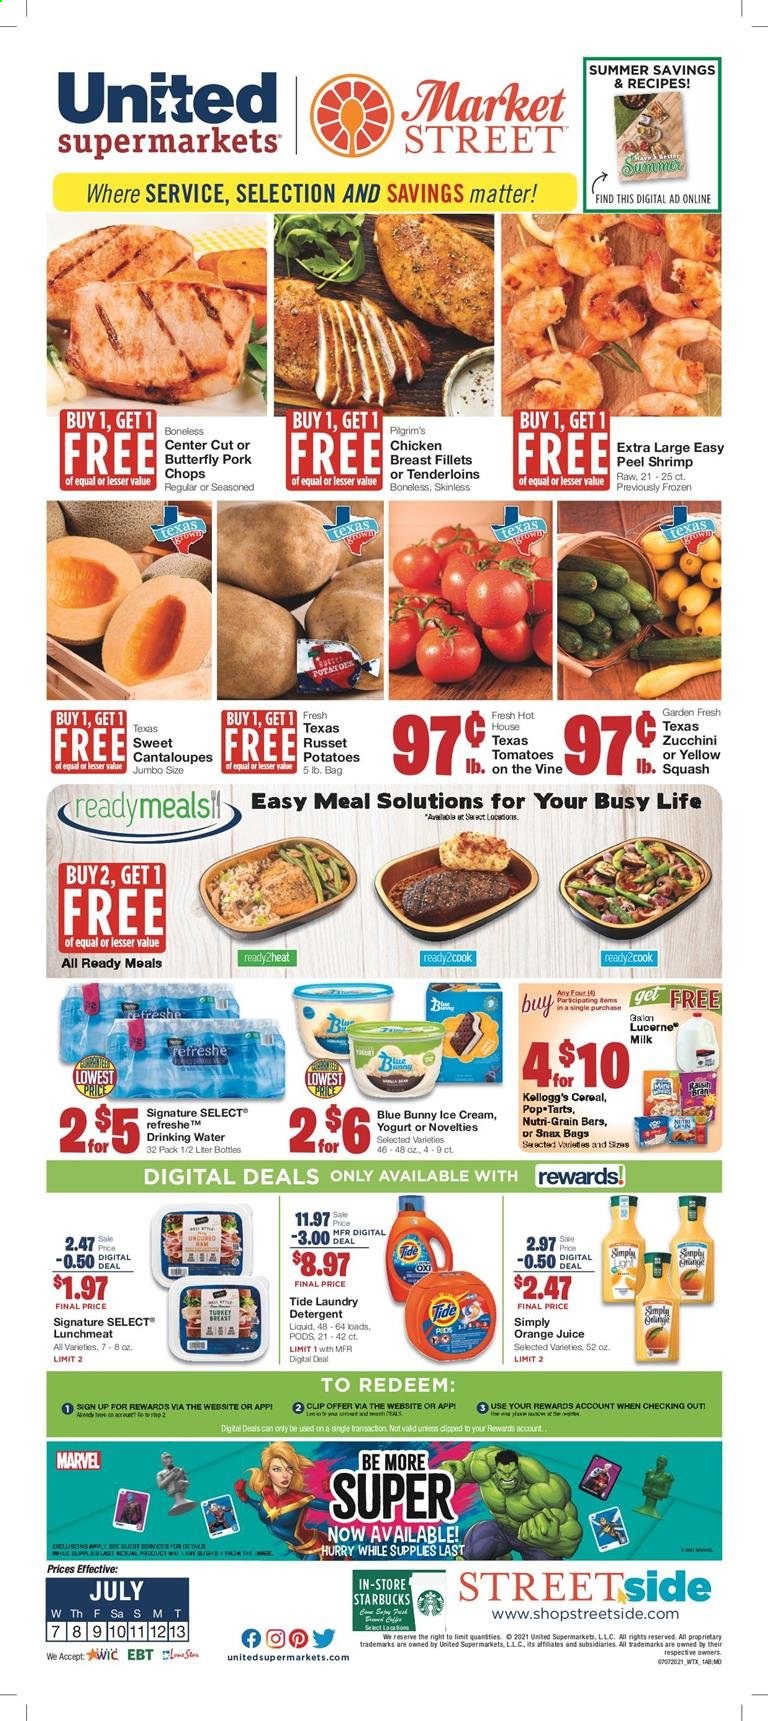 thumbnail - United Supermarkets Flyer - 07/07/2021 - 07/13/2021 - Sales products - cantaloupe, russet potatoes, tomatoes, zucchini, potatoes, chicken breasts, pork chops, pork meat, lunch meat, yoghurt, milk, ice cream, Blue Bunny, Kellogg's, cereals, Nutri-Grain, orange juice, juice, Starbucks, detergent, Tide, laundry detergent. Page 1.